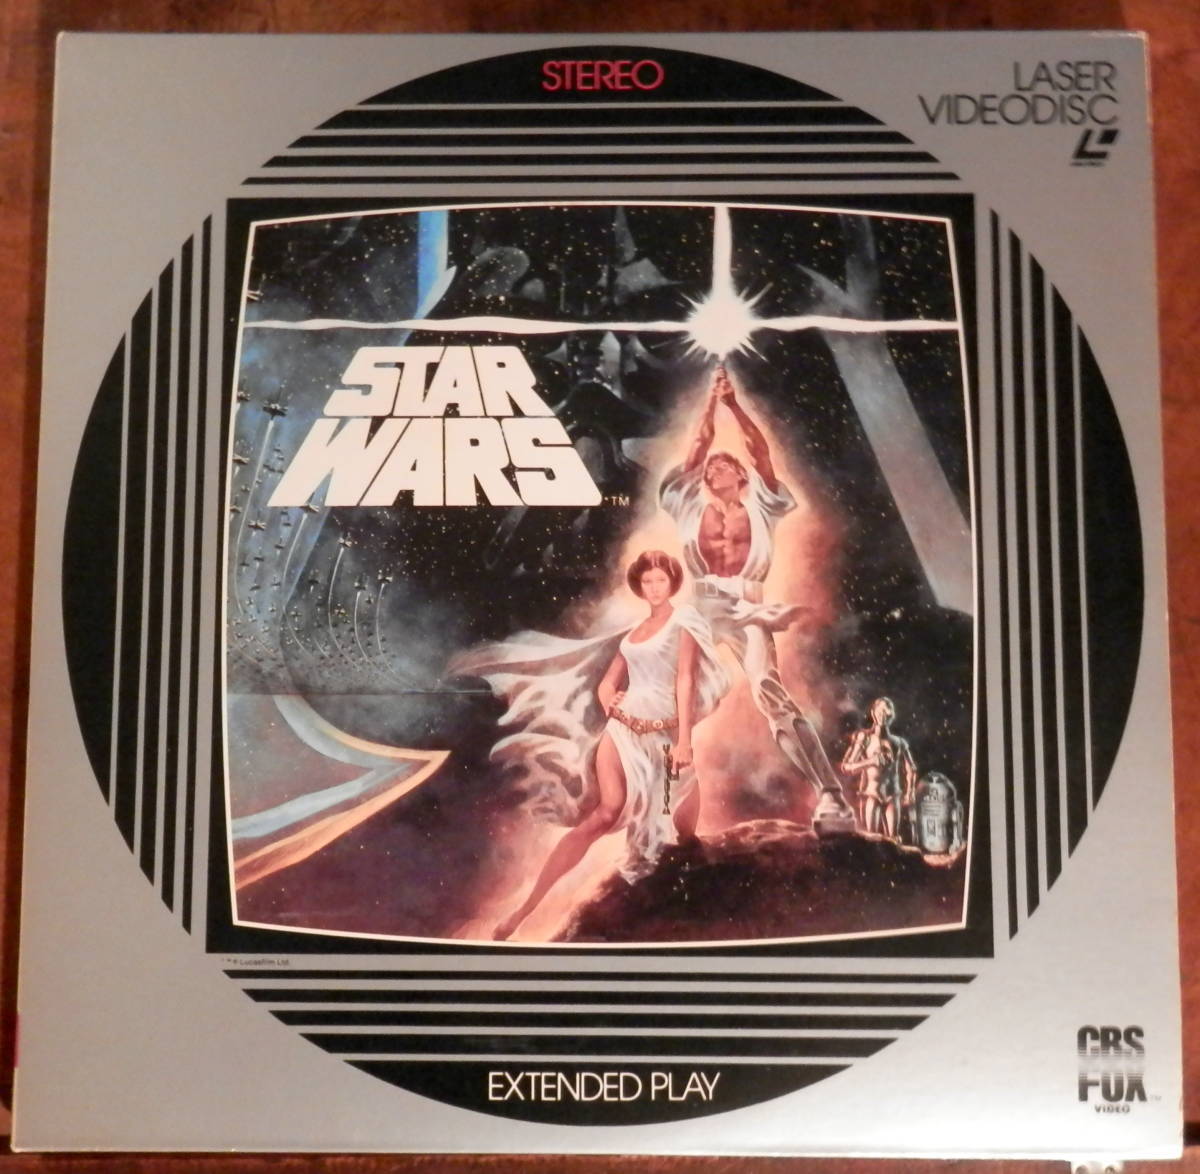 [LD] Star Wars 1 work eyes (ep.4) 1983 year domestic the first record 